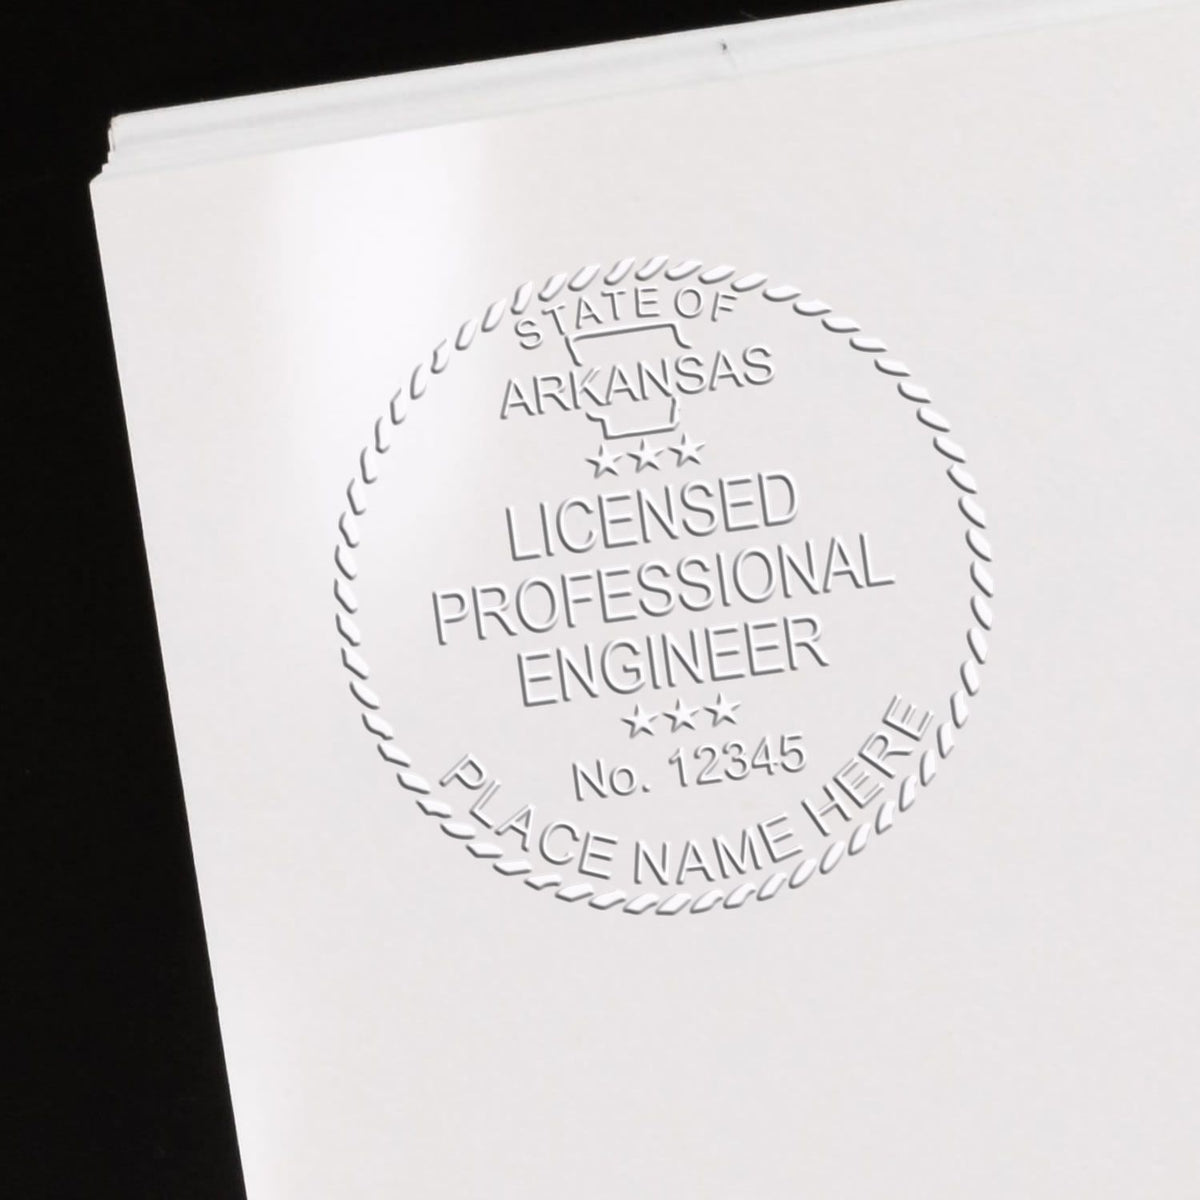 A photograph of the Arkansas Engineer Desk Seal stamp impression reveals a vivid, professional image of the on paper.